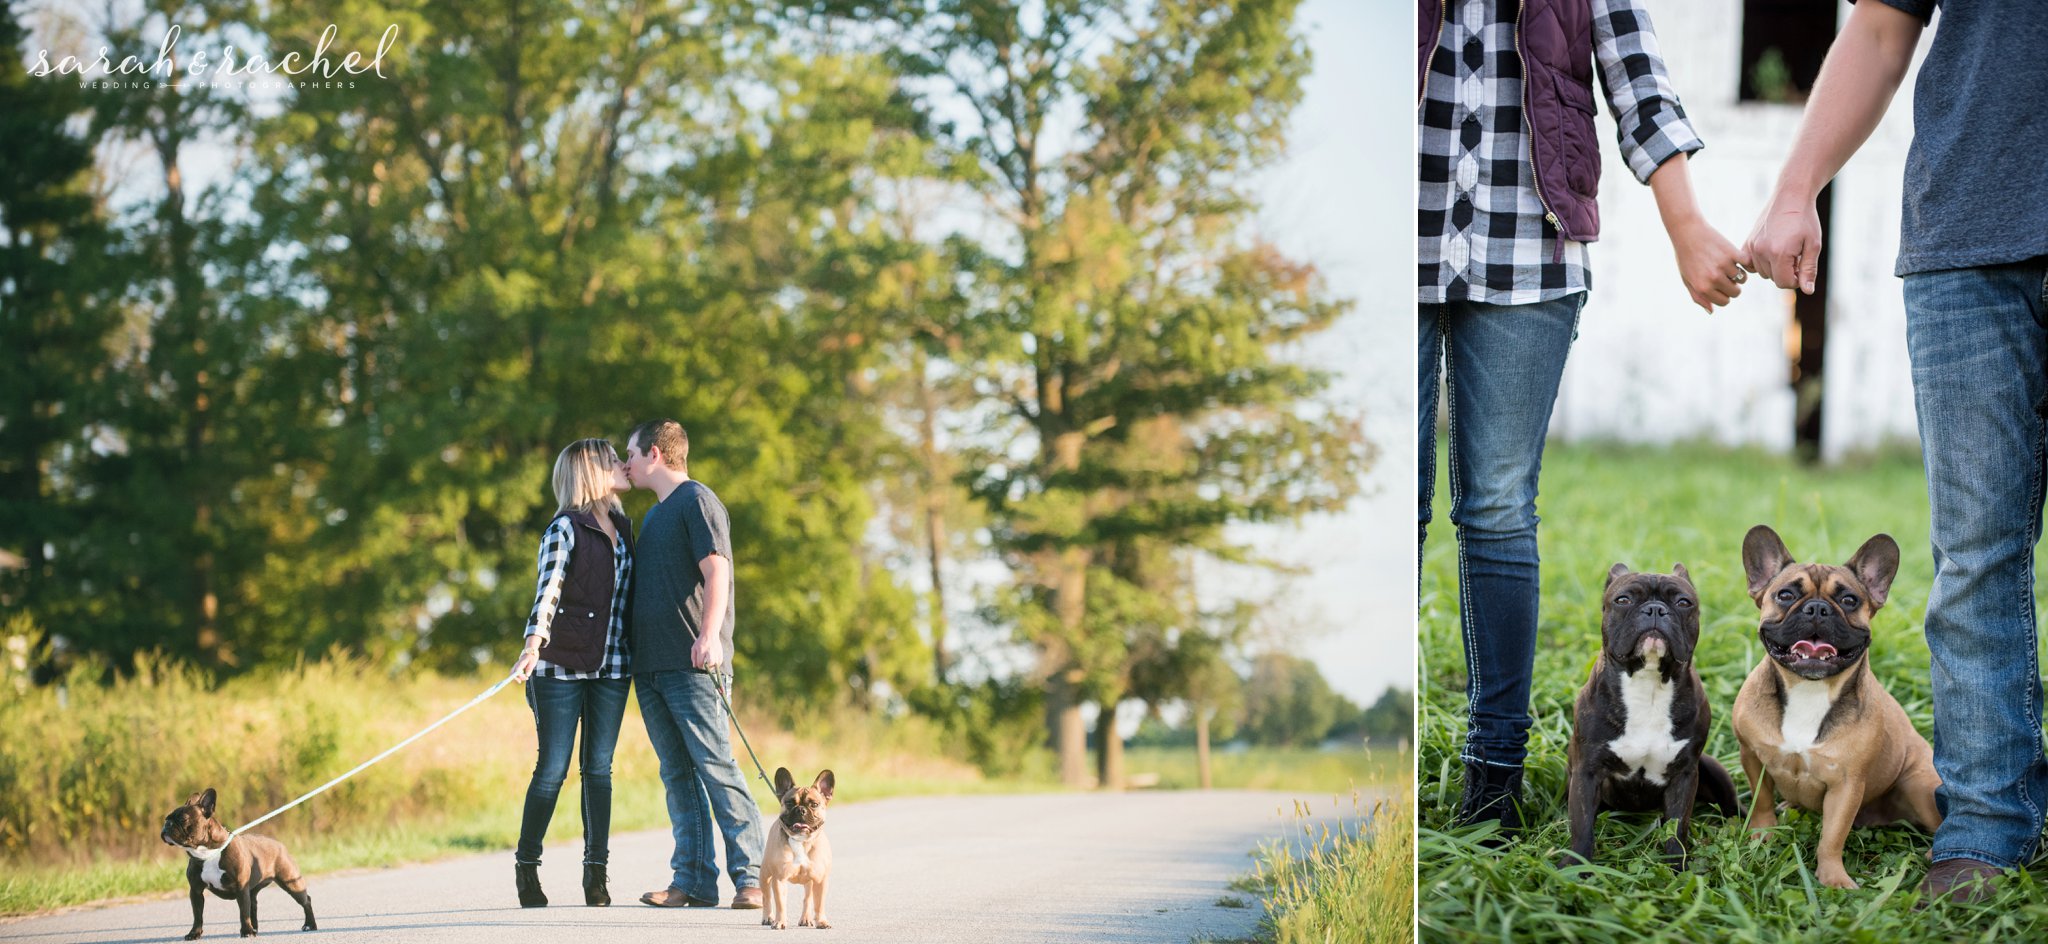 Indiana Barn Engagement Session | Sarah and rachel wedding photographers | Indiana wedding photographers